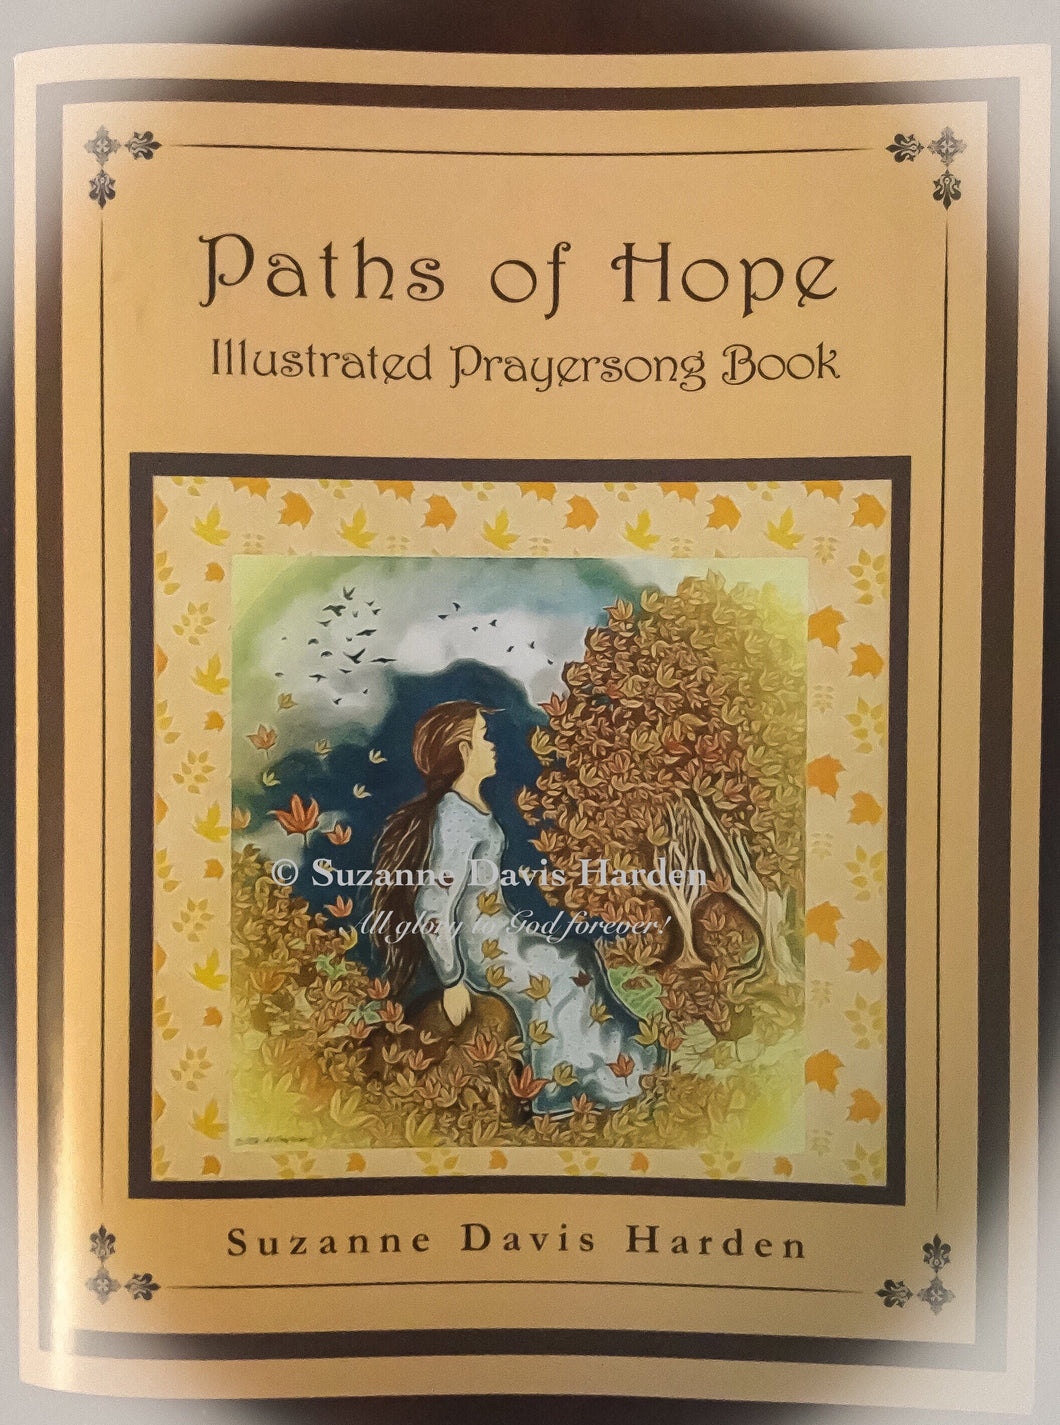 Book Three-Paths of Hope Illustrated Prayer Song Book by Suzanne Davis Harden